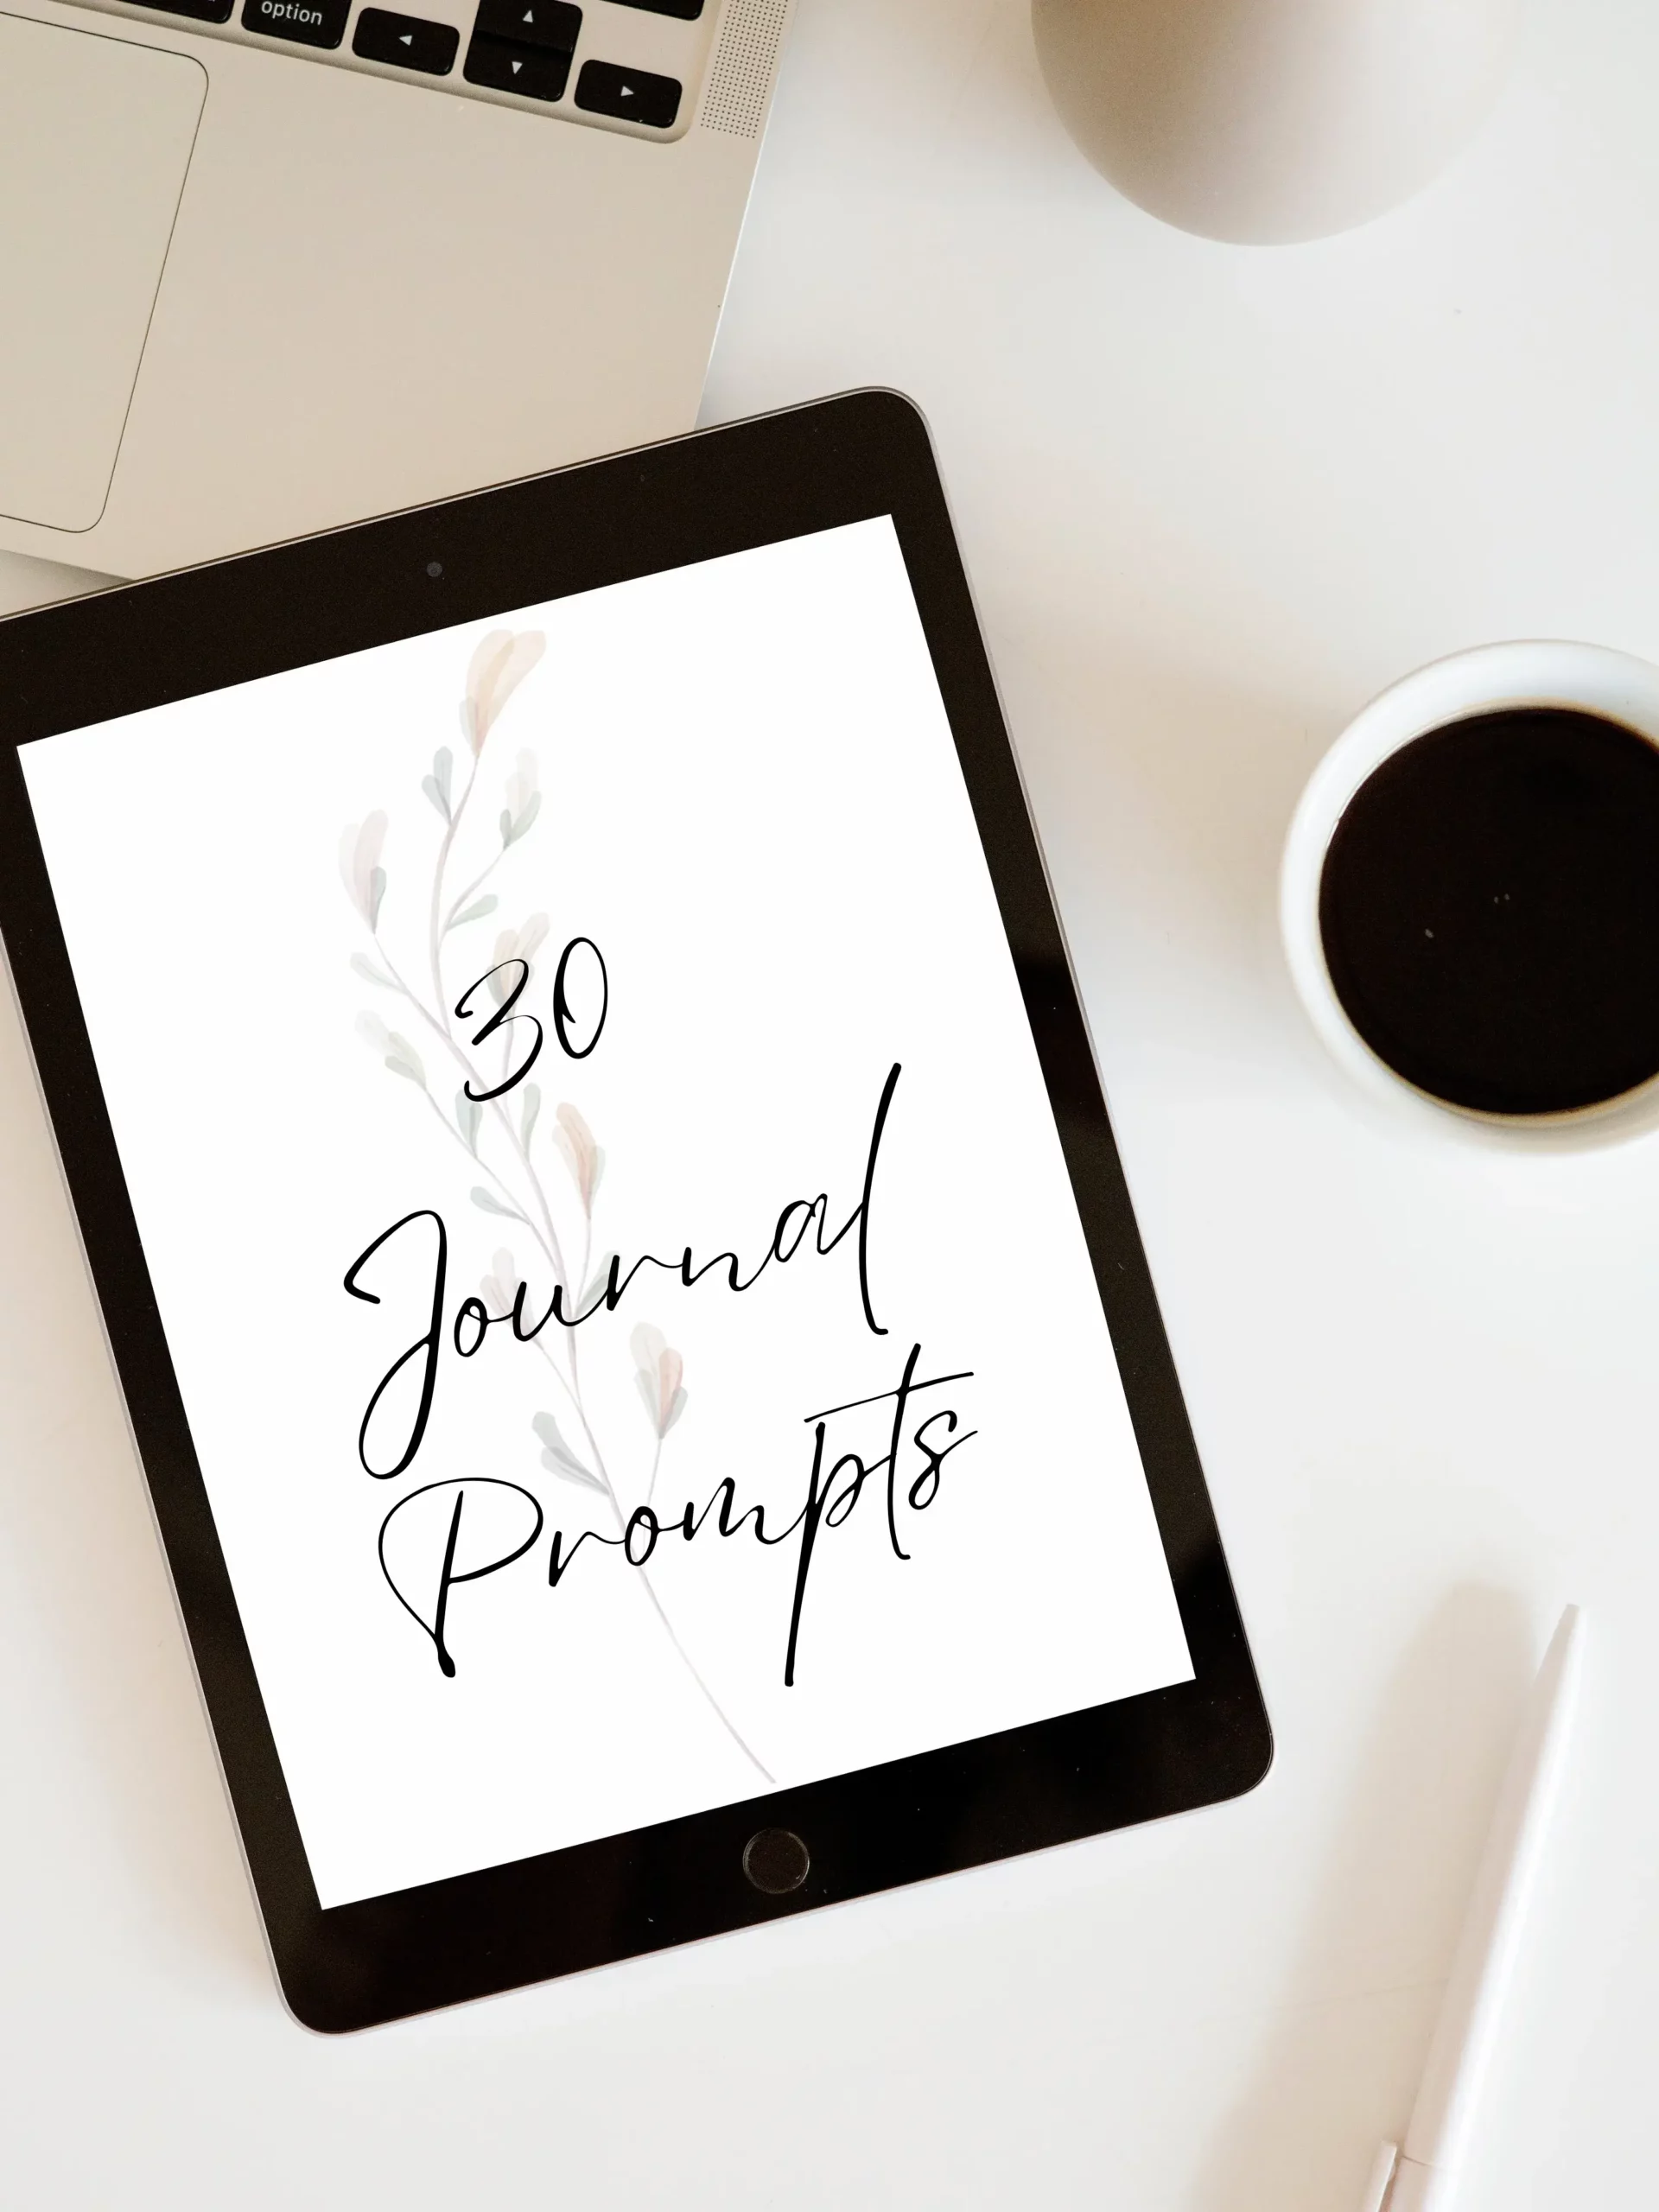 Therapy journal 30 mental health journal prompts